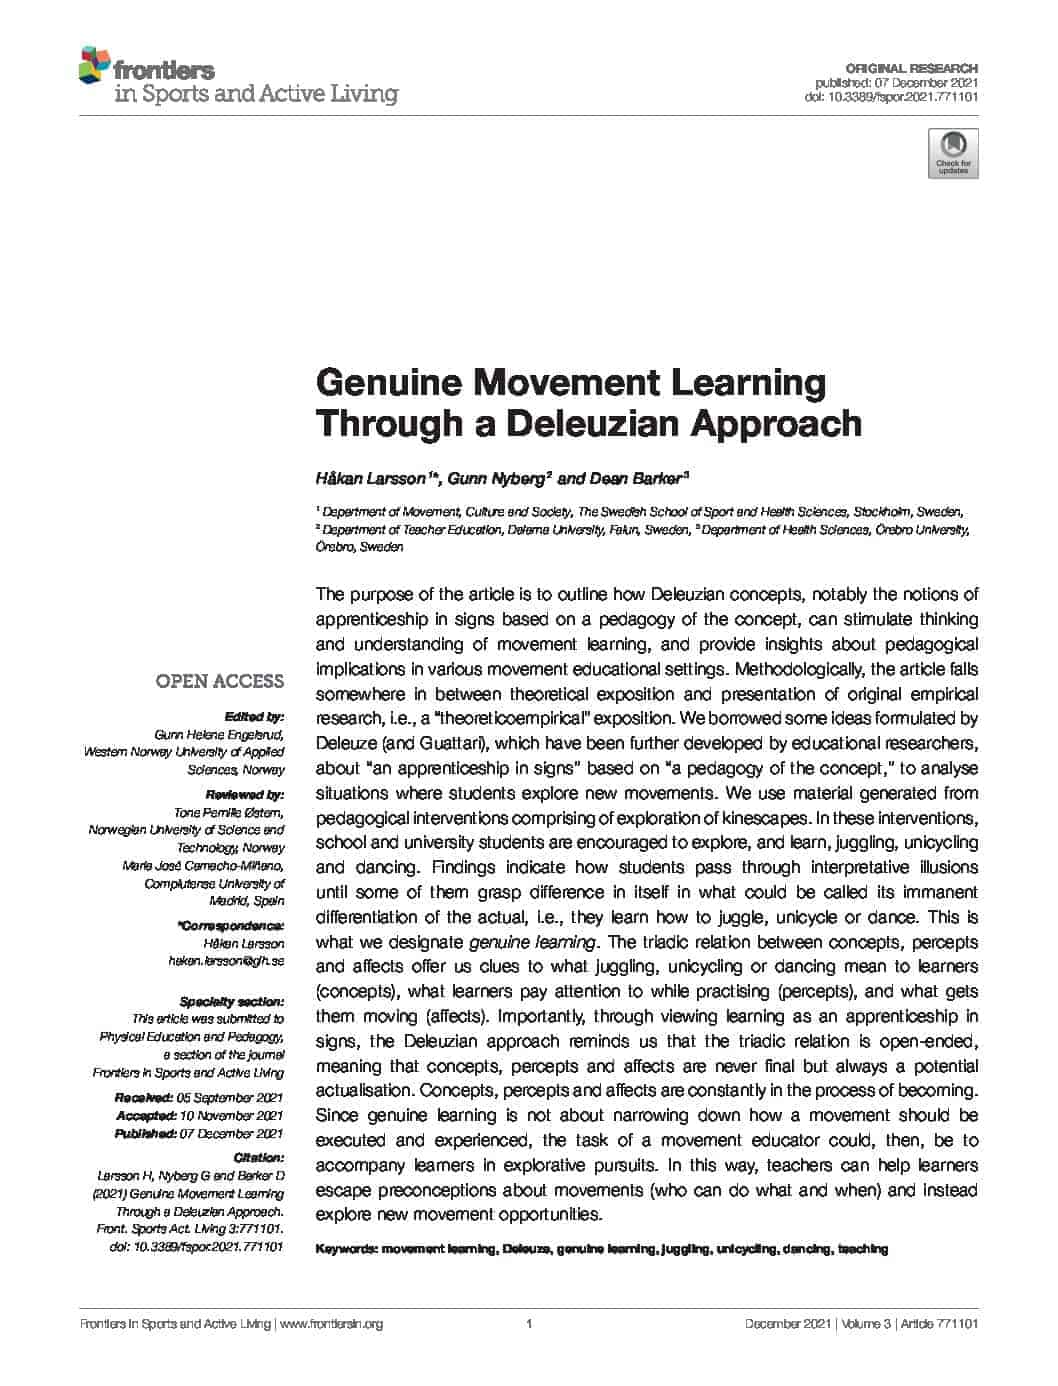 Genuine Movement Learning Through a Deleuzian Approach